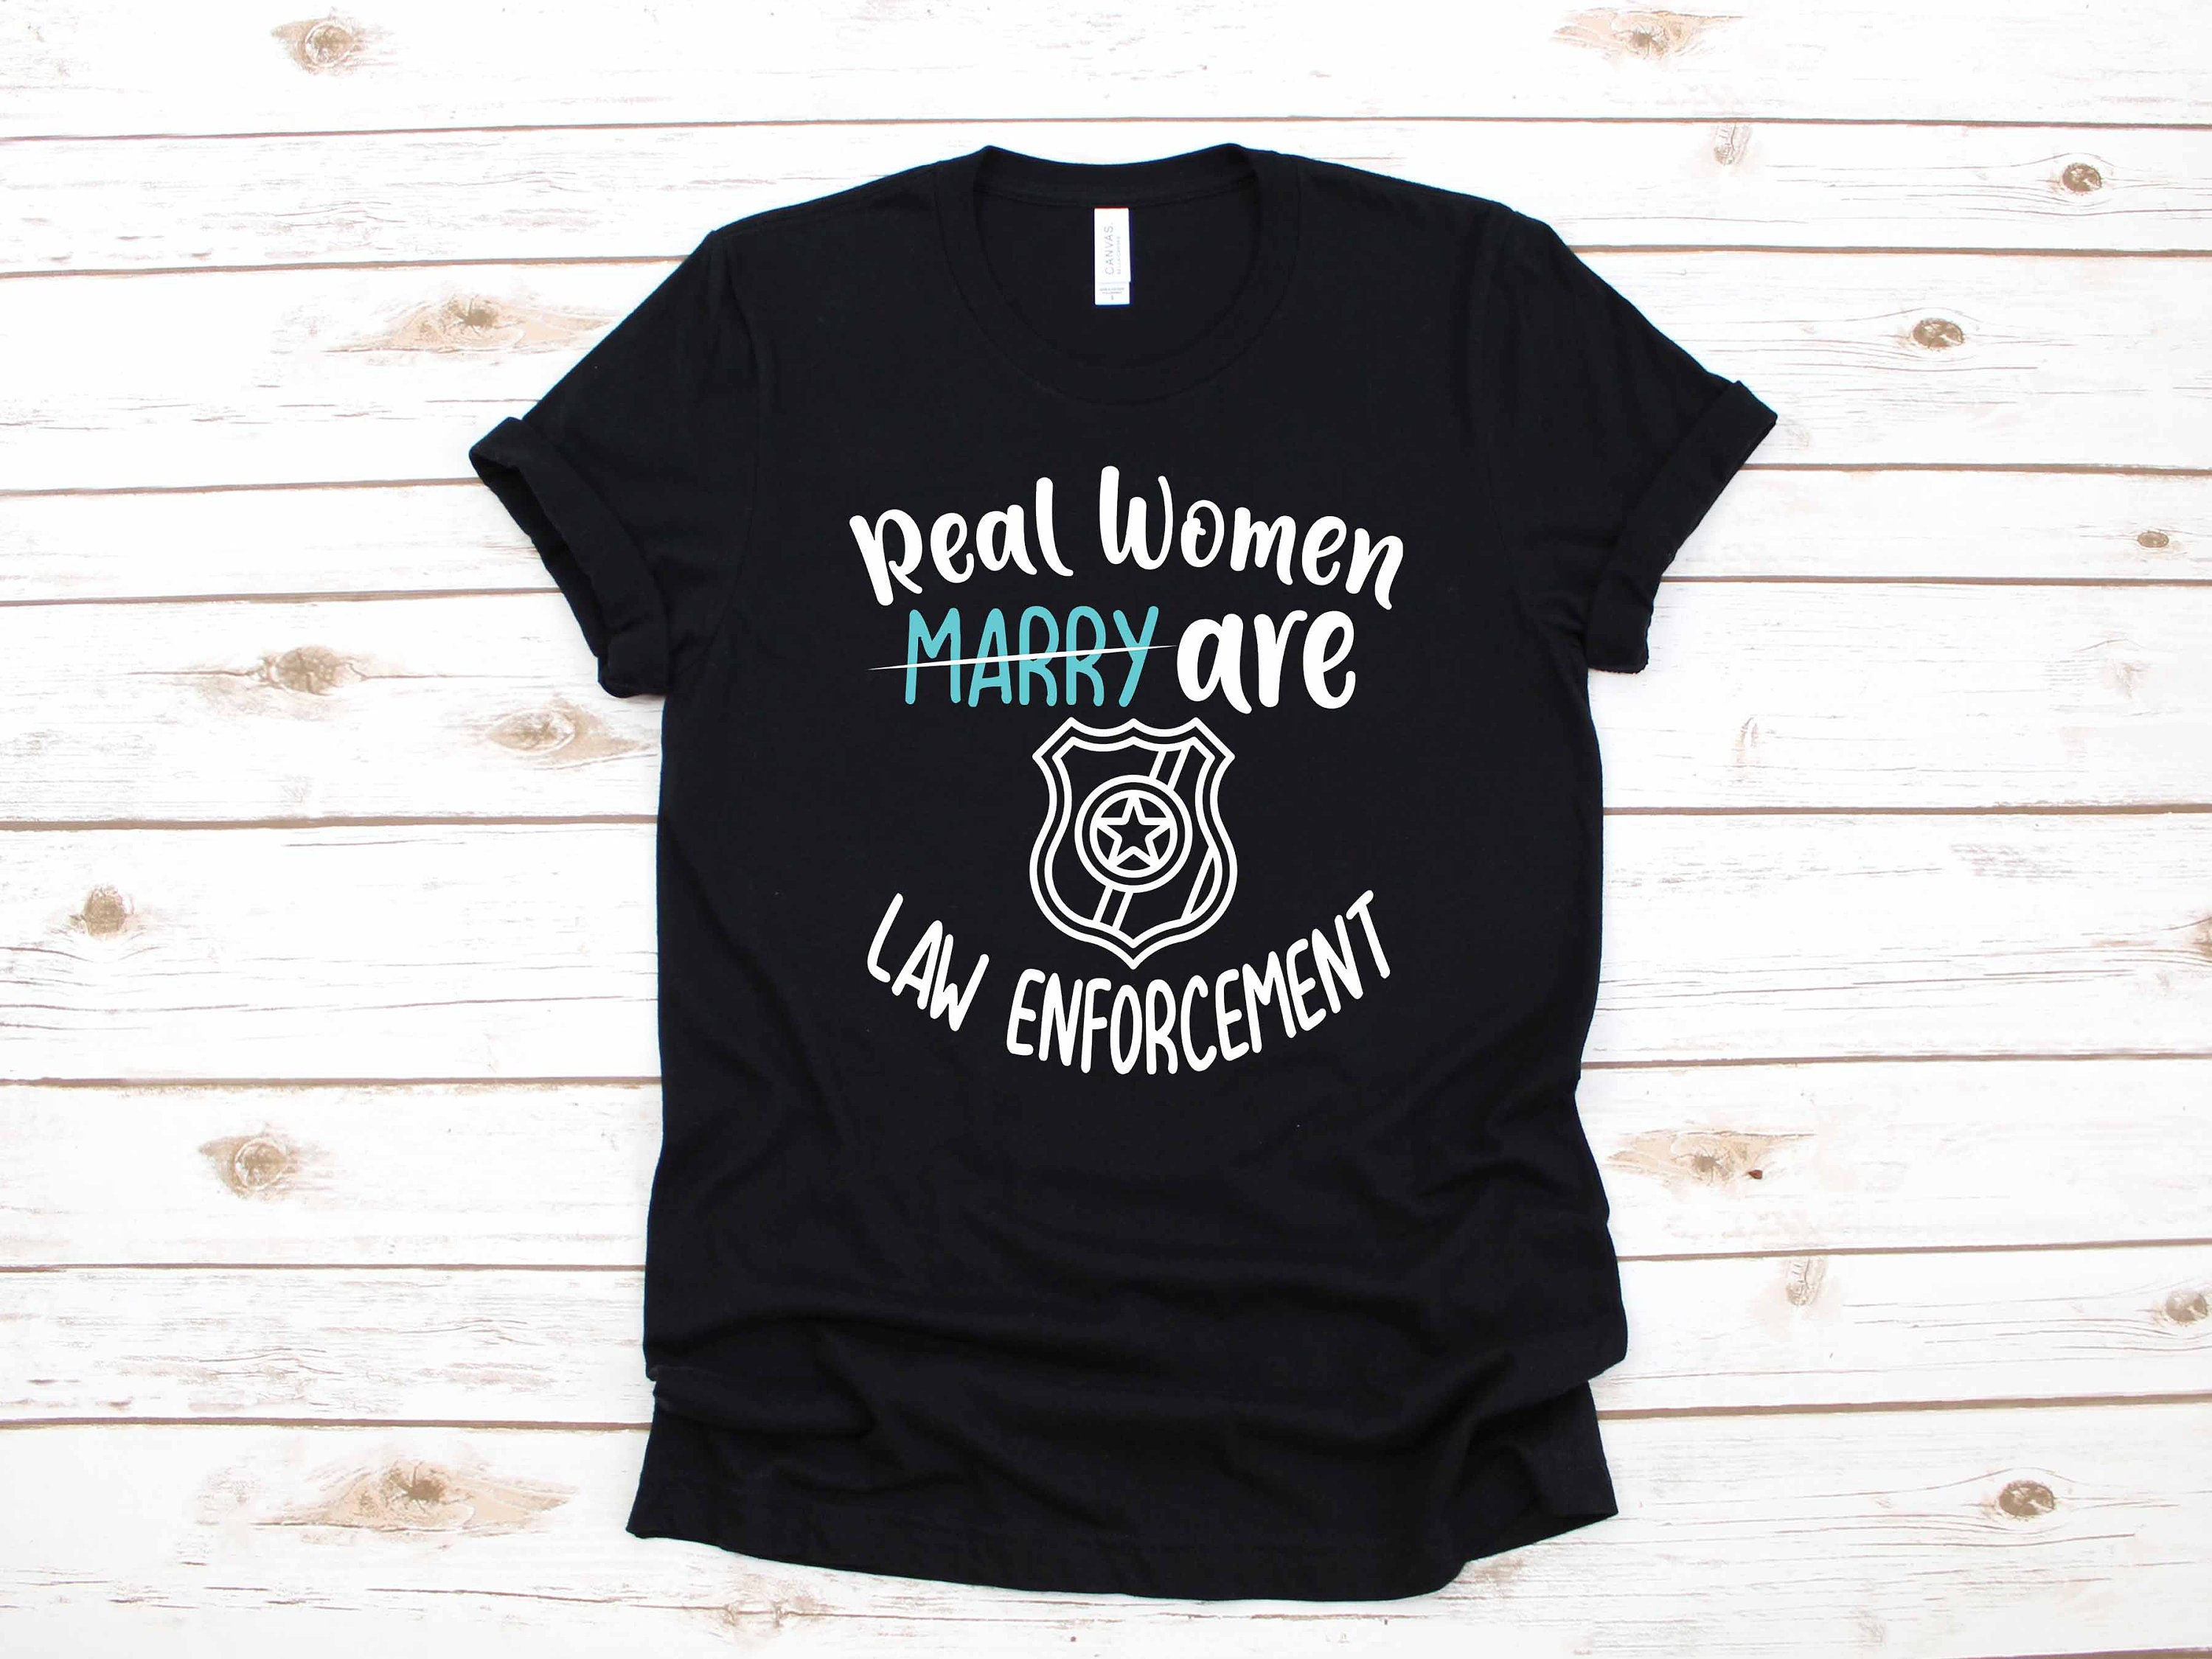 Police Officer Gifts, Police, Police Academy Graduation Gifts, Police  Gifts, Police Officer Gifts for Men, Police Gifts Female, T-shirt 